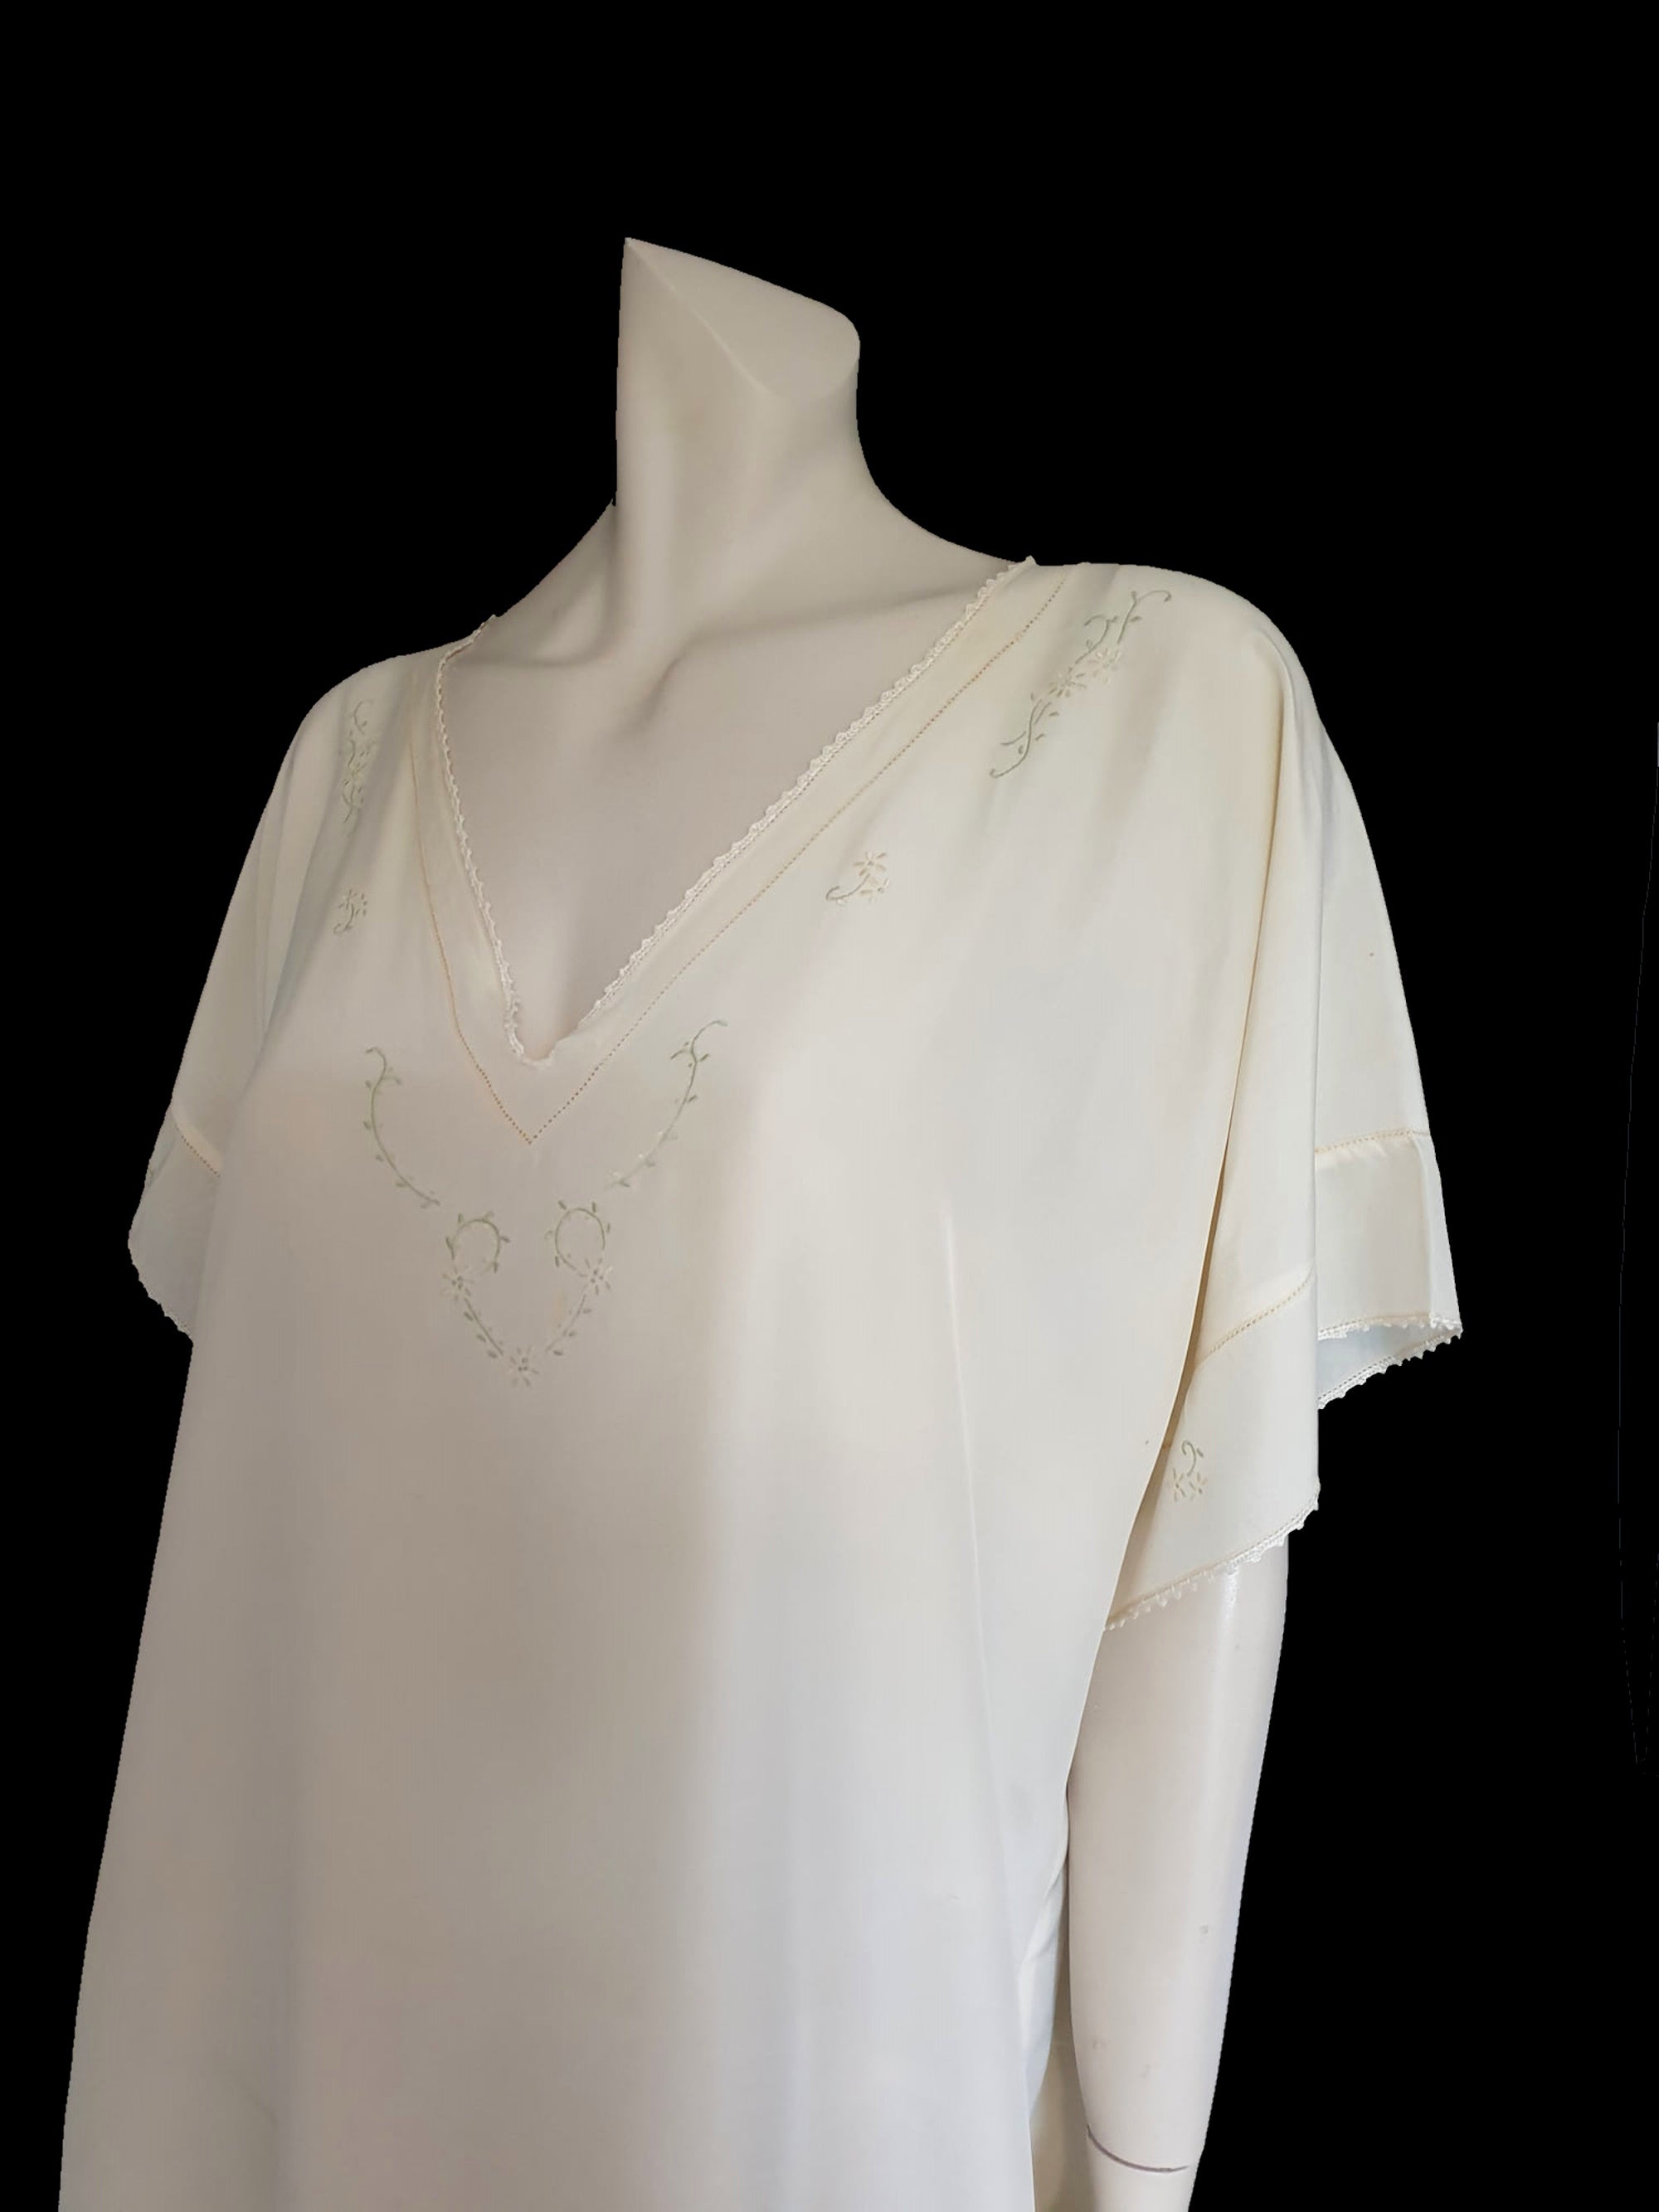 Antique 1920s silky loose-fitting rayon nightgown with hand embroidery medium to large